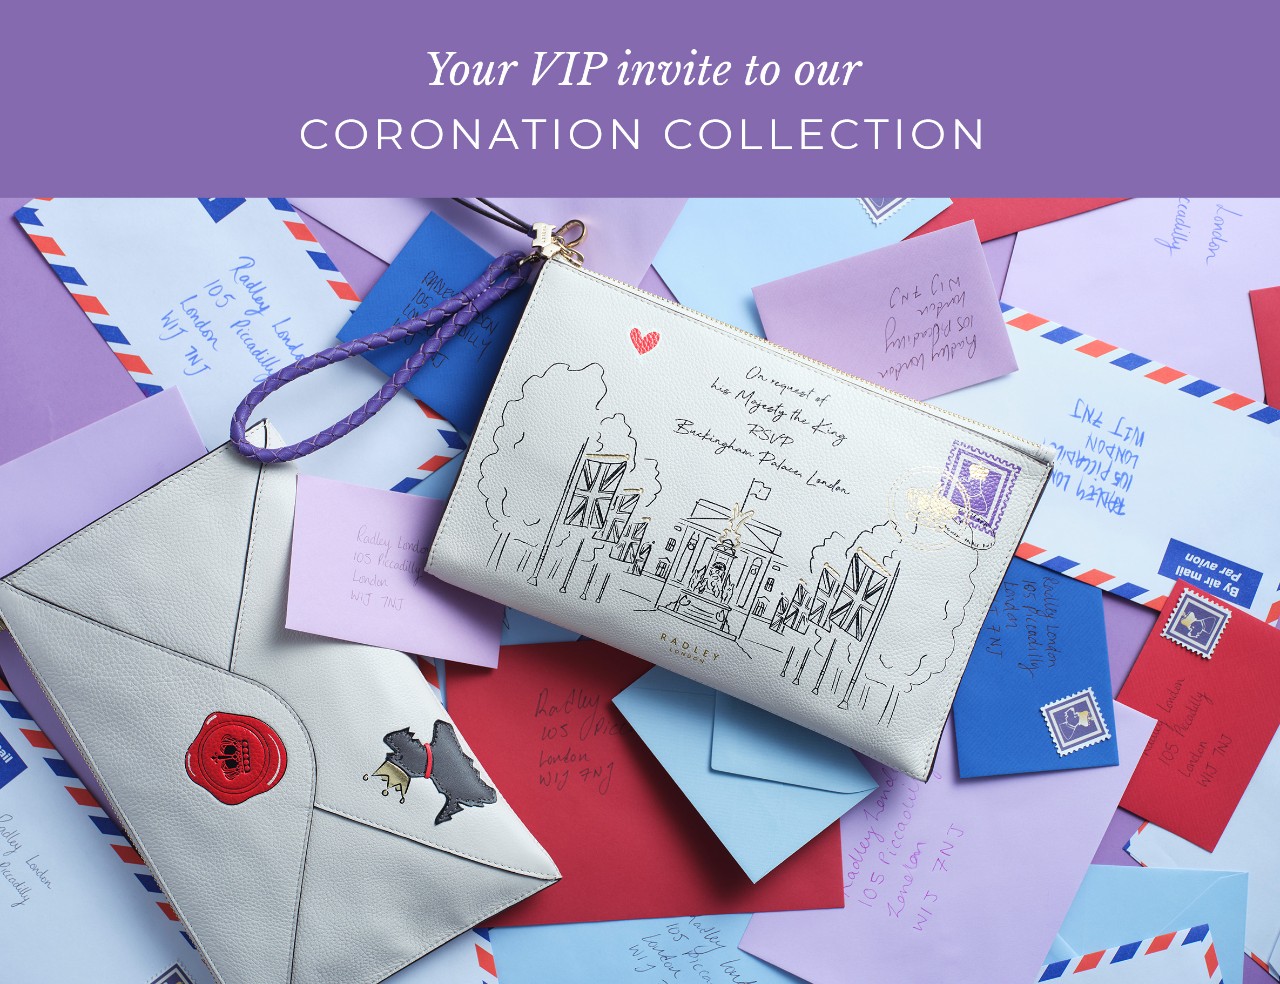 Your VIP invite to our Coronation Collection